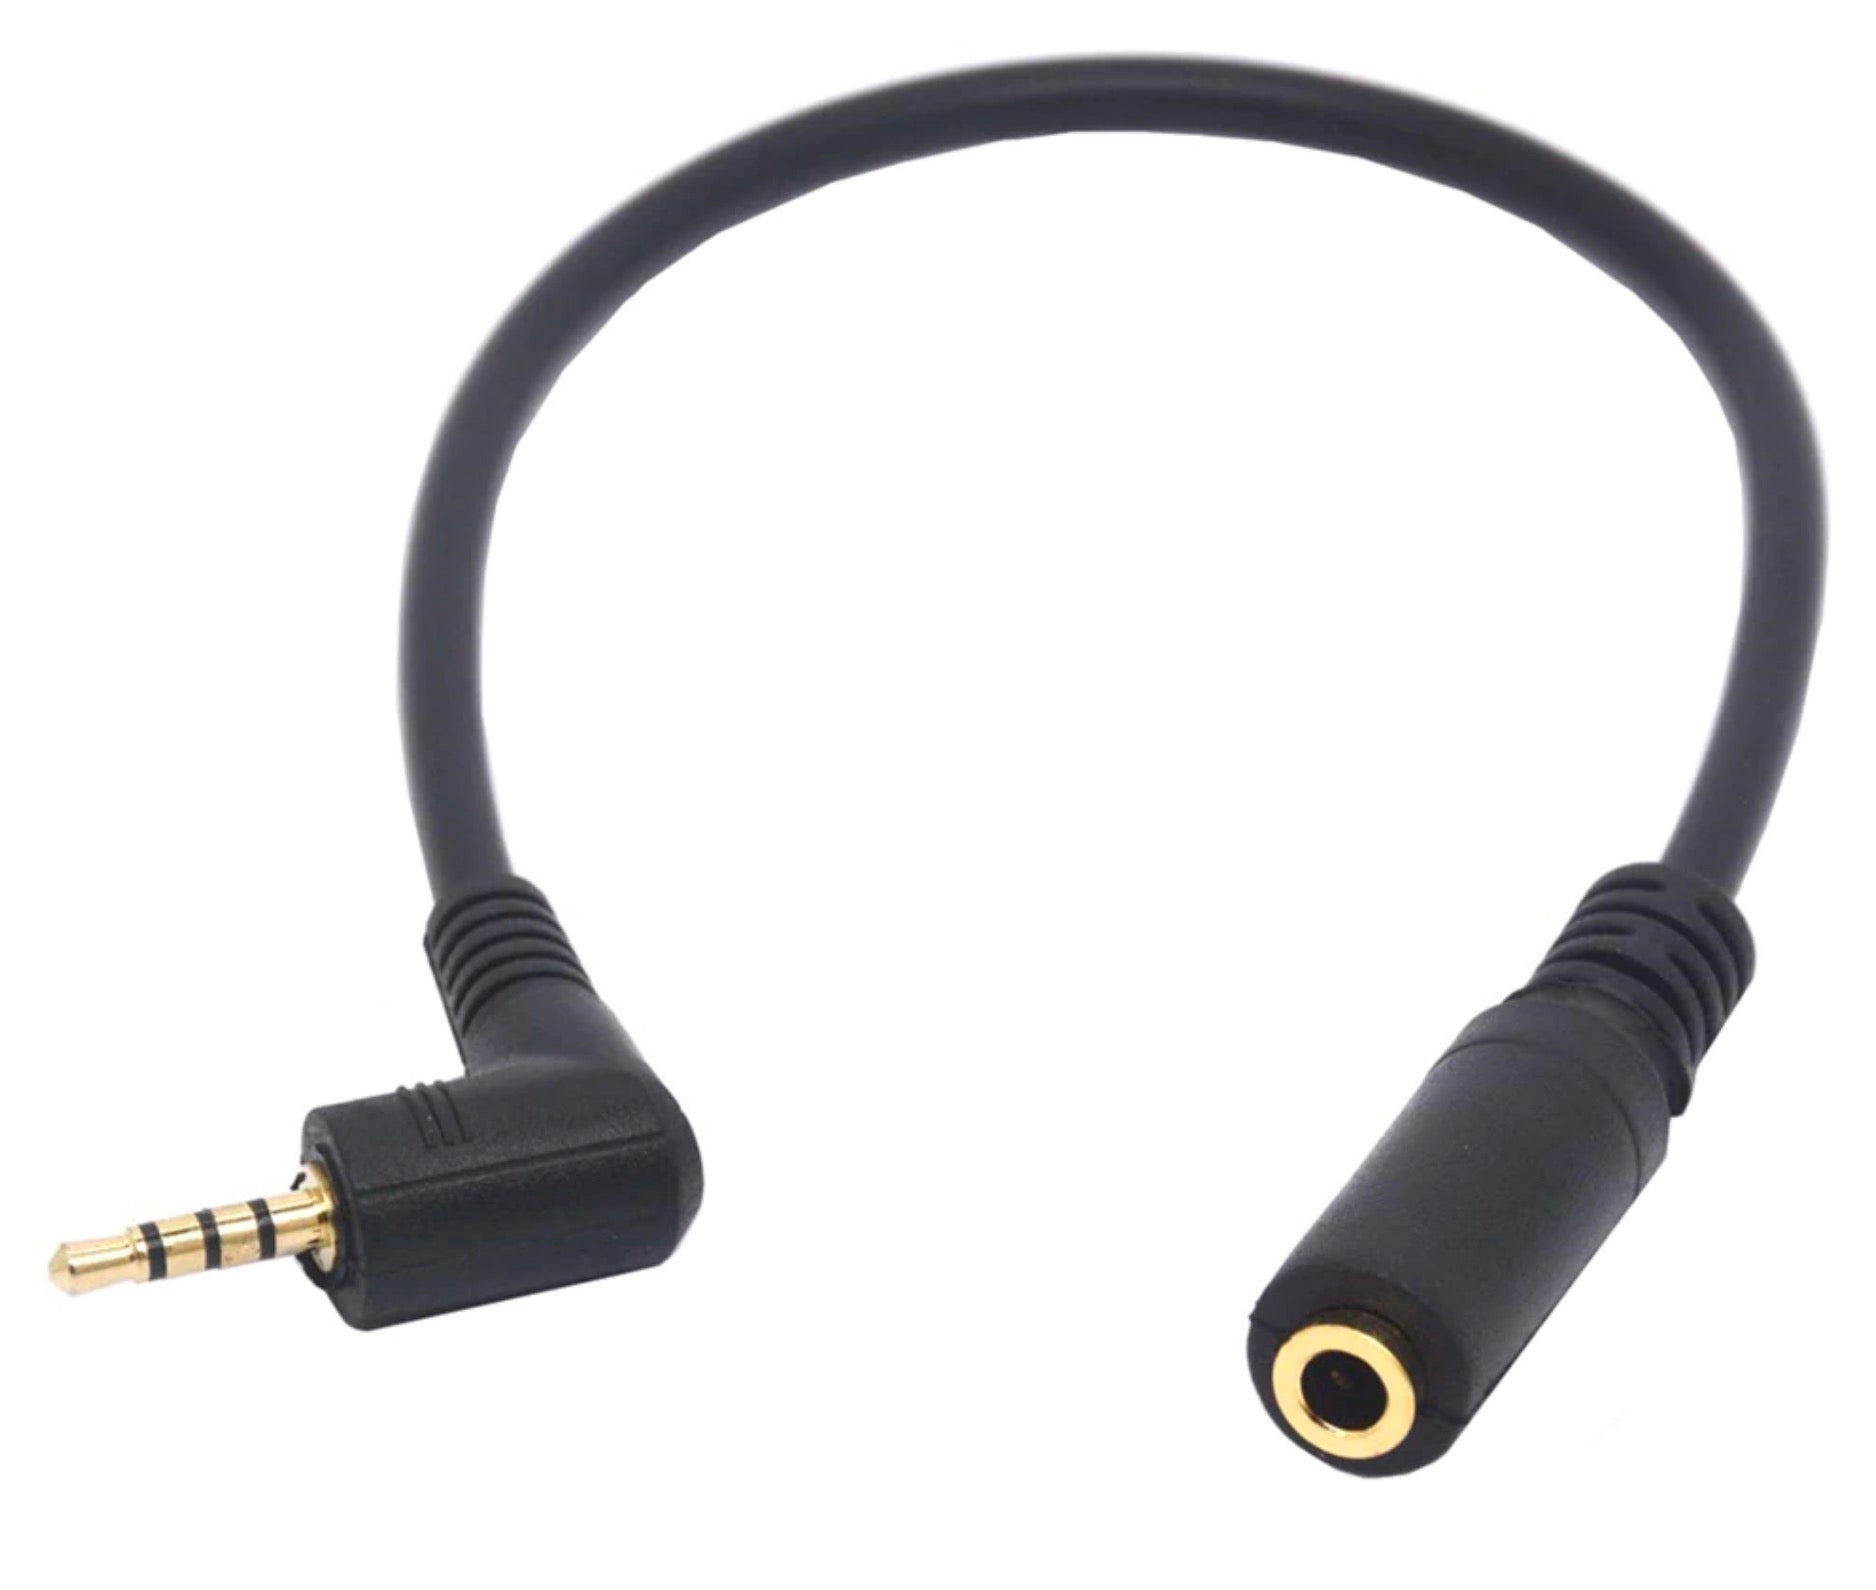 2.5mm 4 Pole Male to 3.5mm Female Stereo Audio Headphone Cable 0.2m